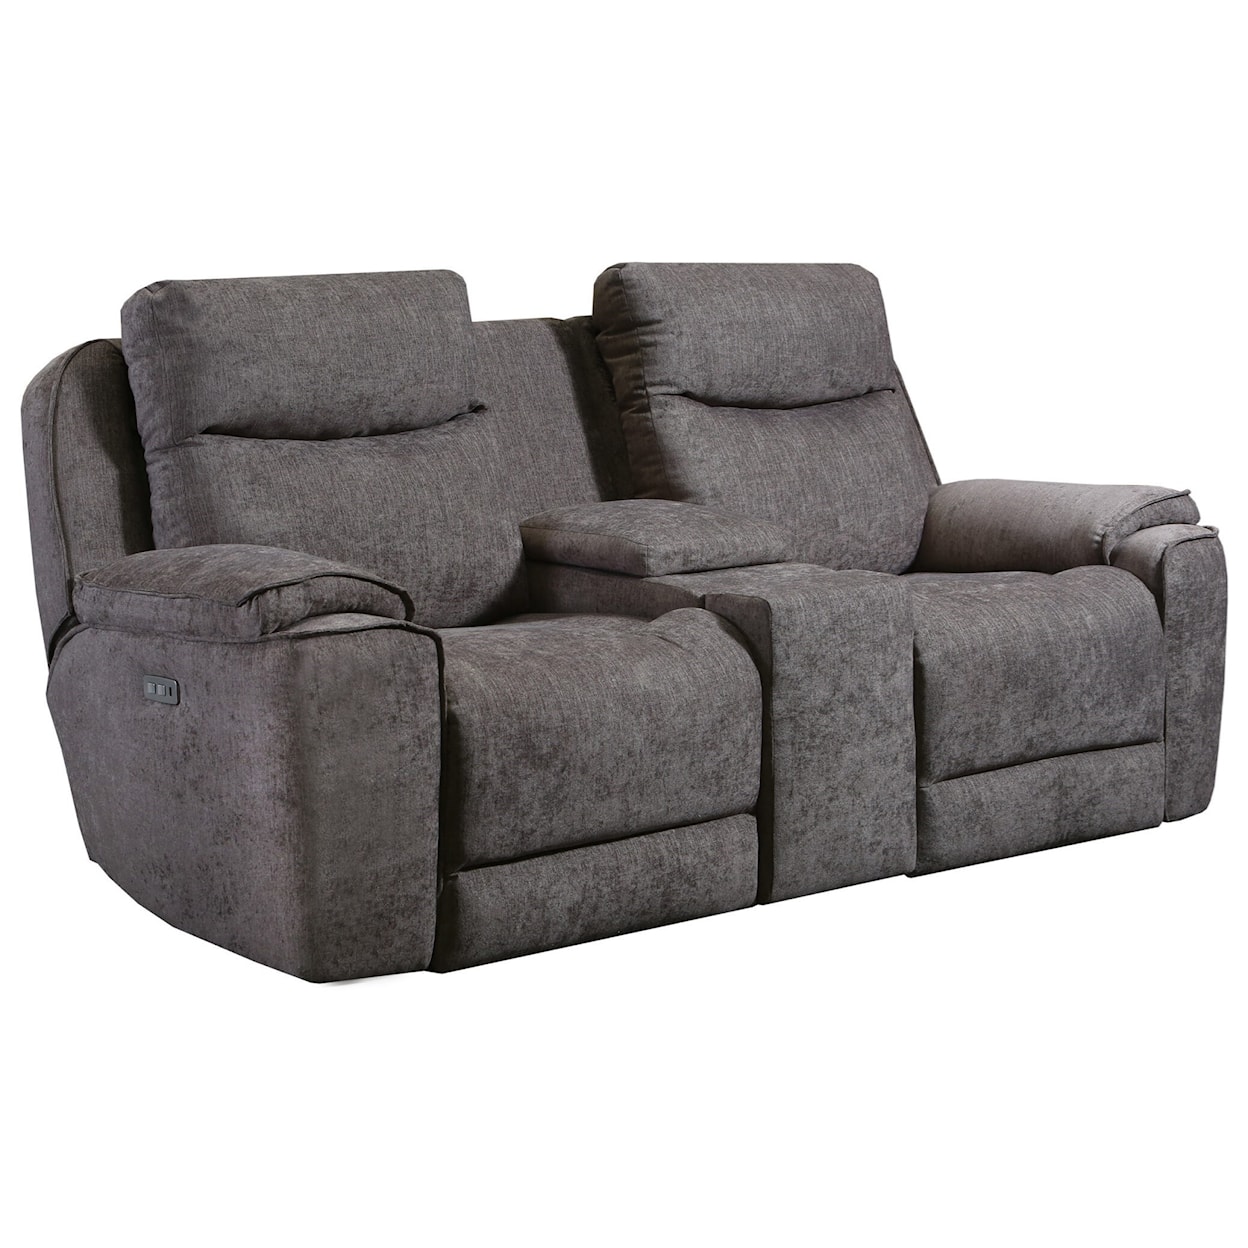 Southern Motion Show Stopper Power Headrest Loveseat w/ Cnsl, Hddn Cuphld